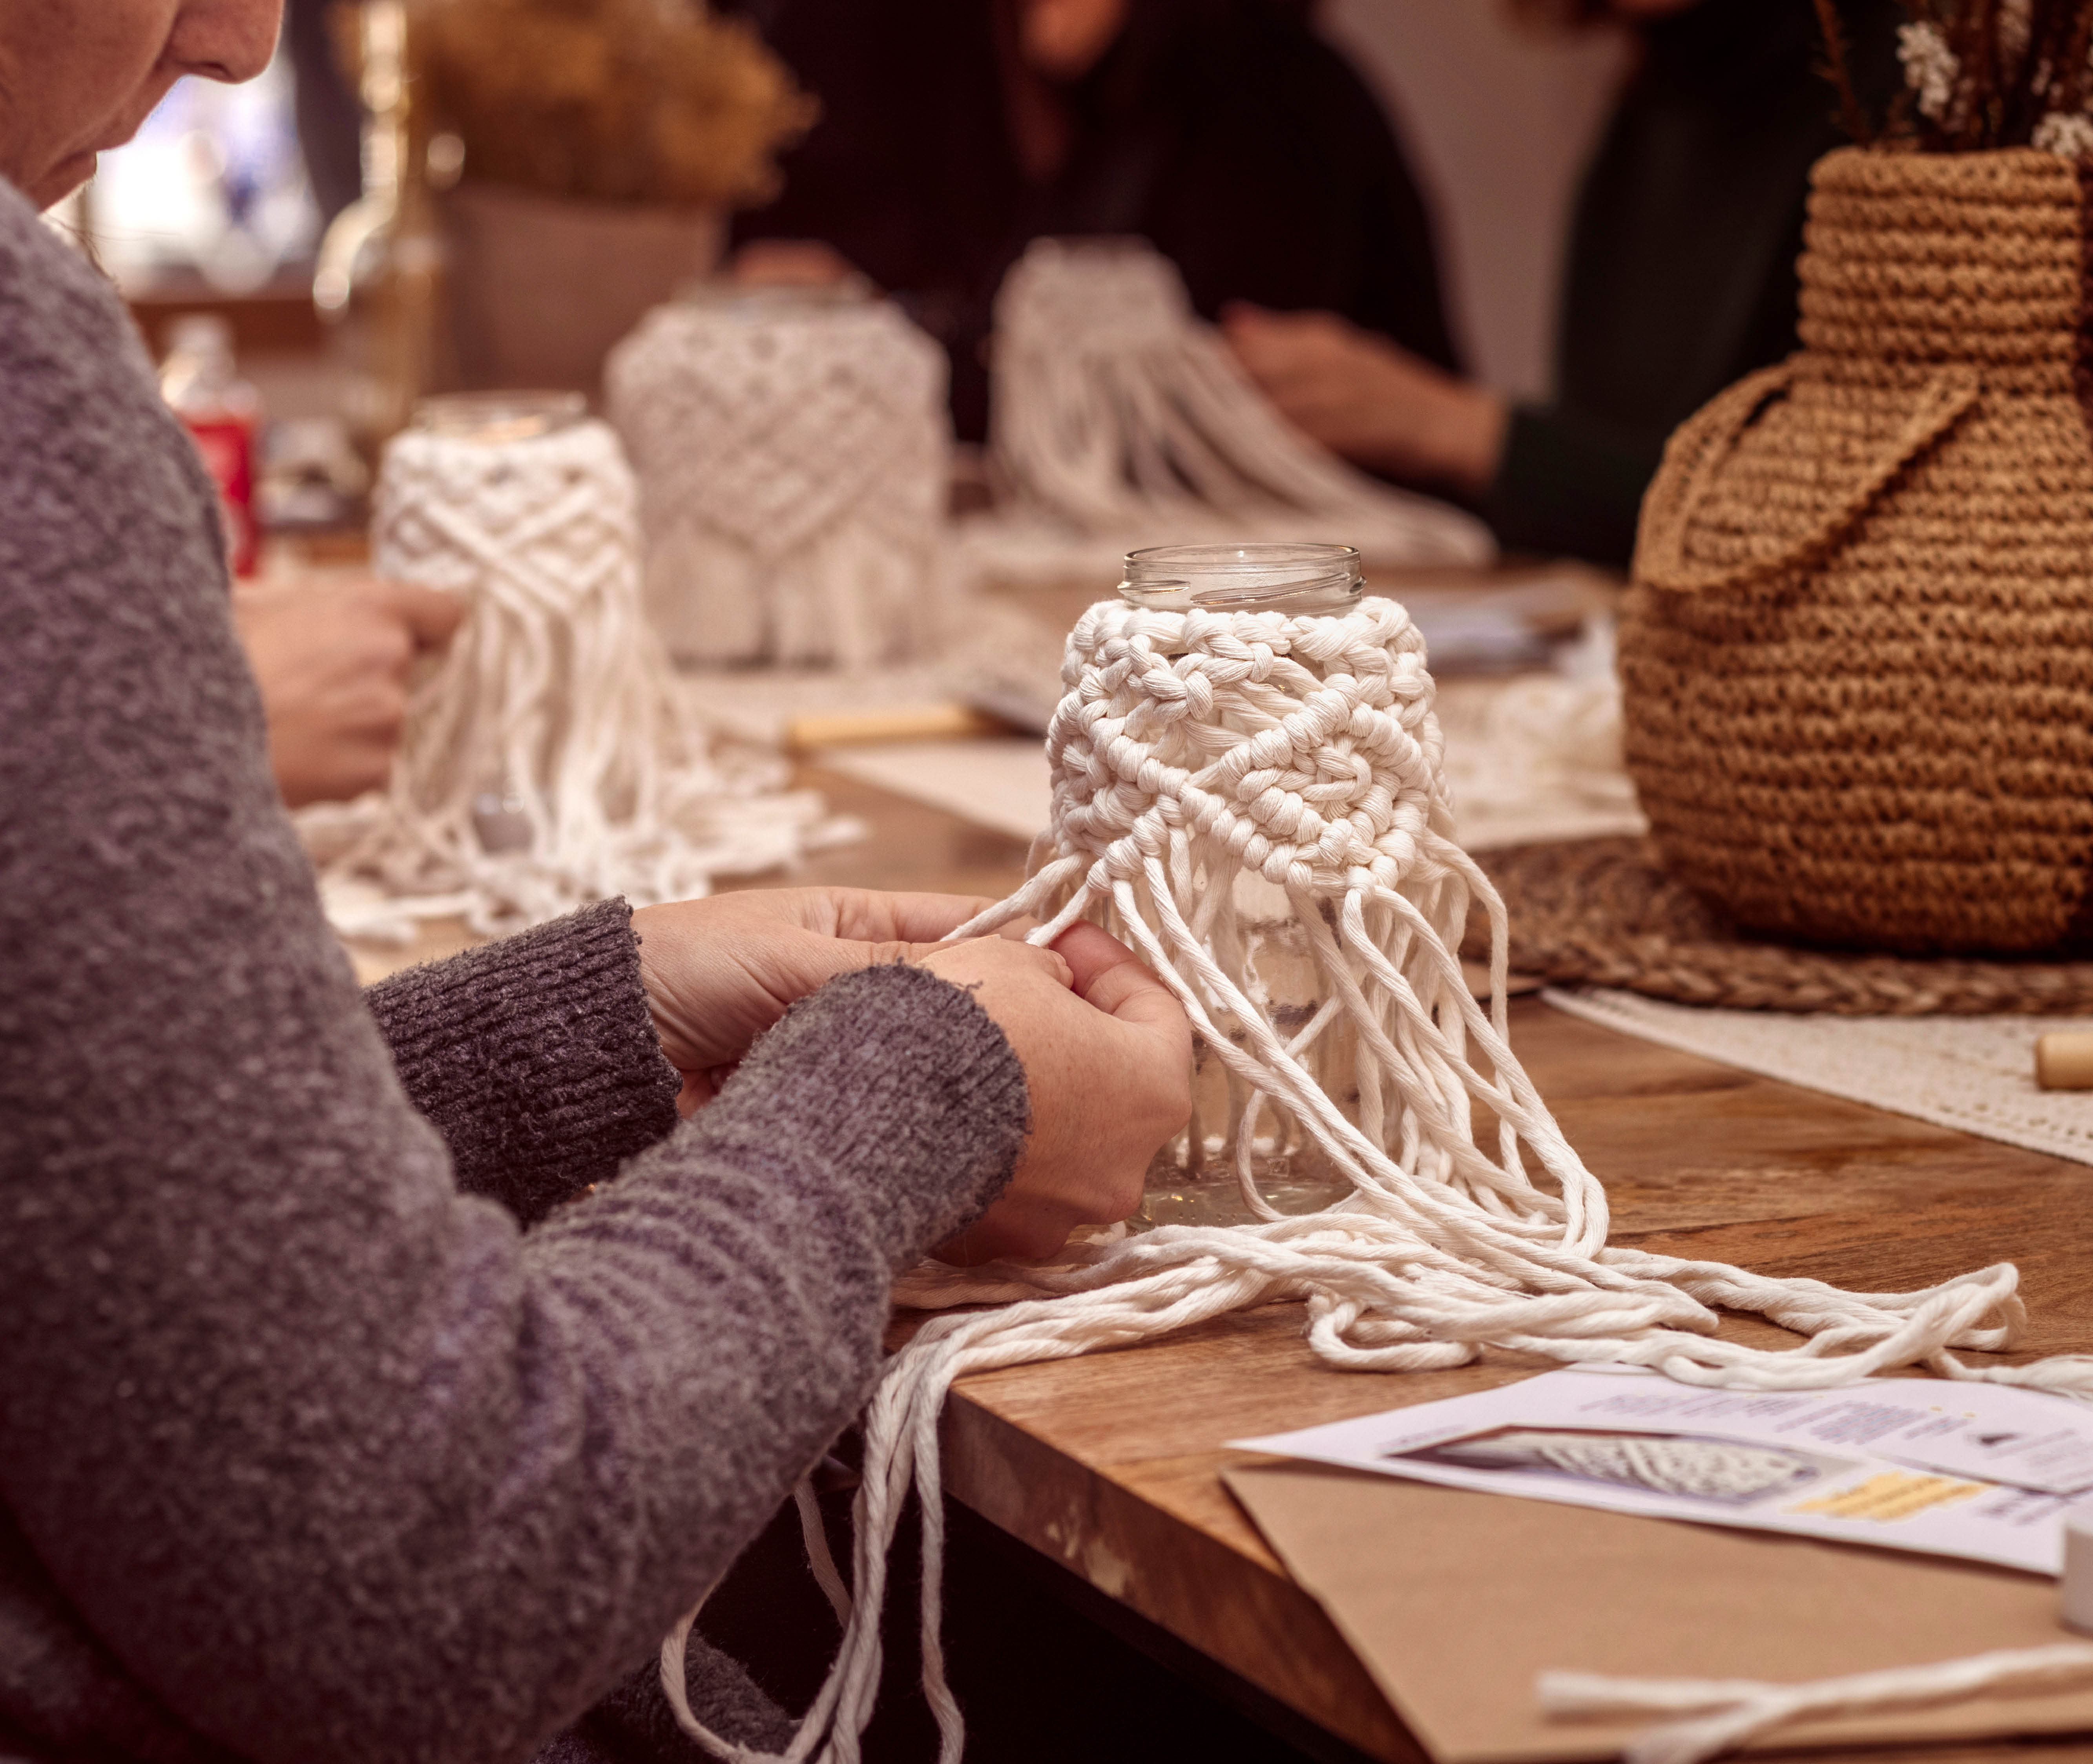 Master the art of macrame by joining us for a hands-on workshop, where you’ll discover the ‘70s textile knotting technique that is making a resurgence.